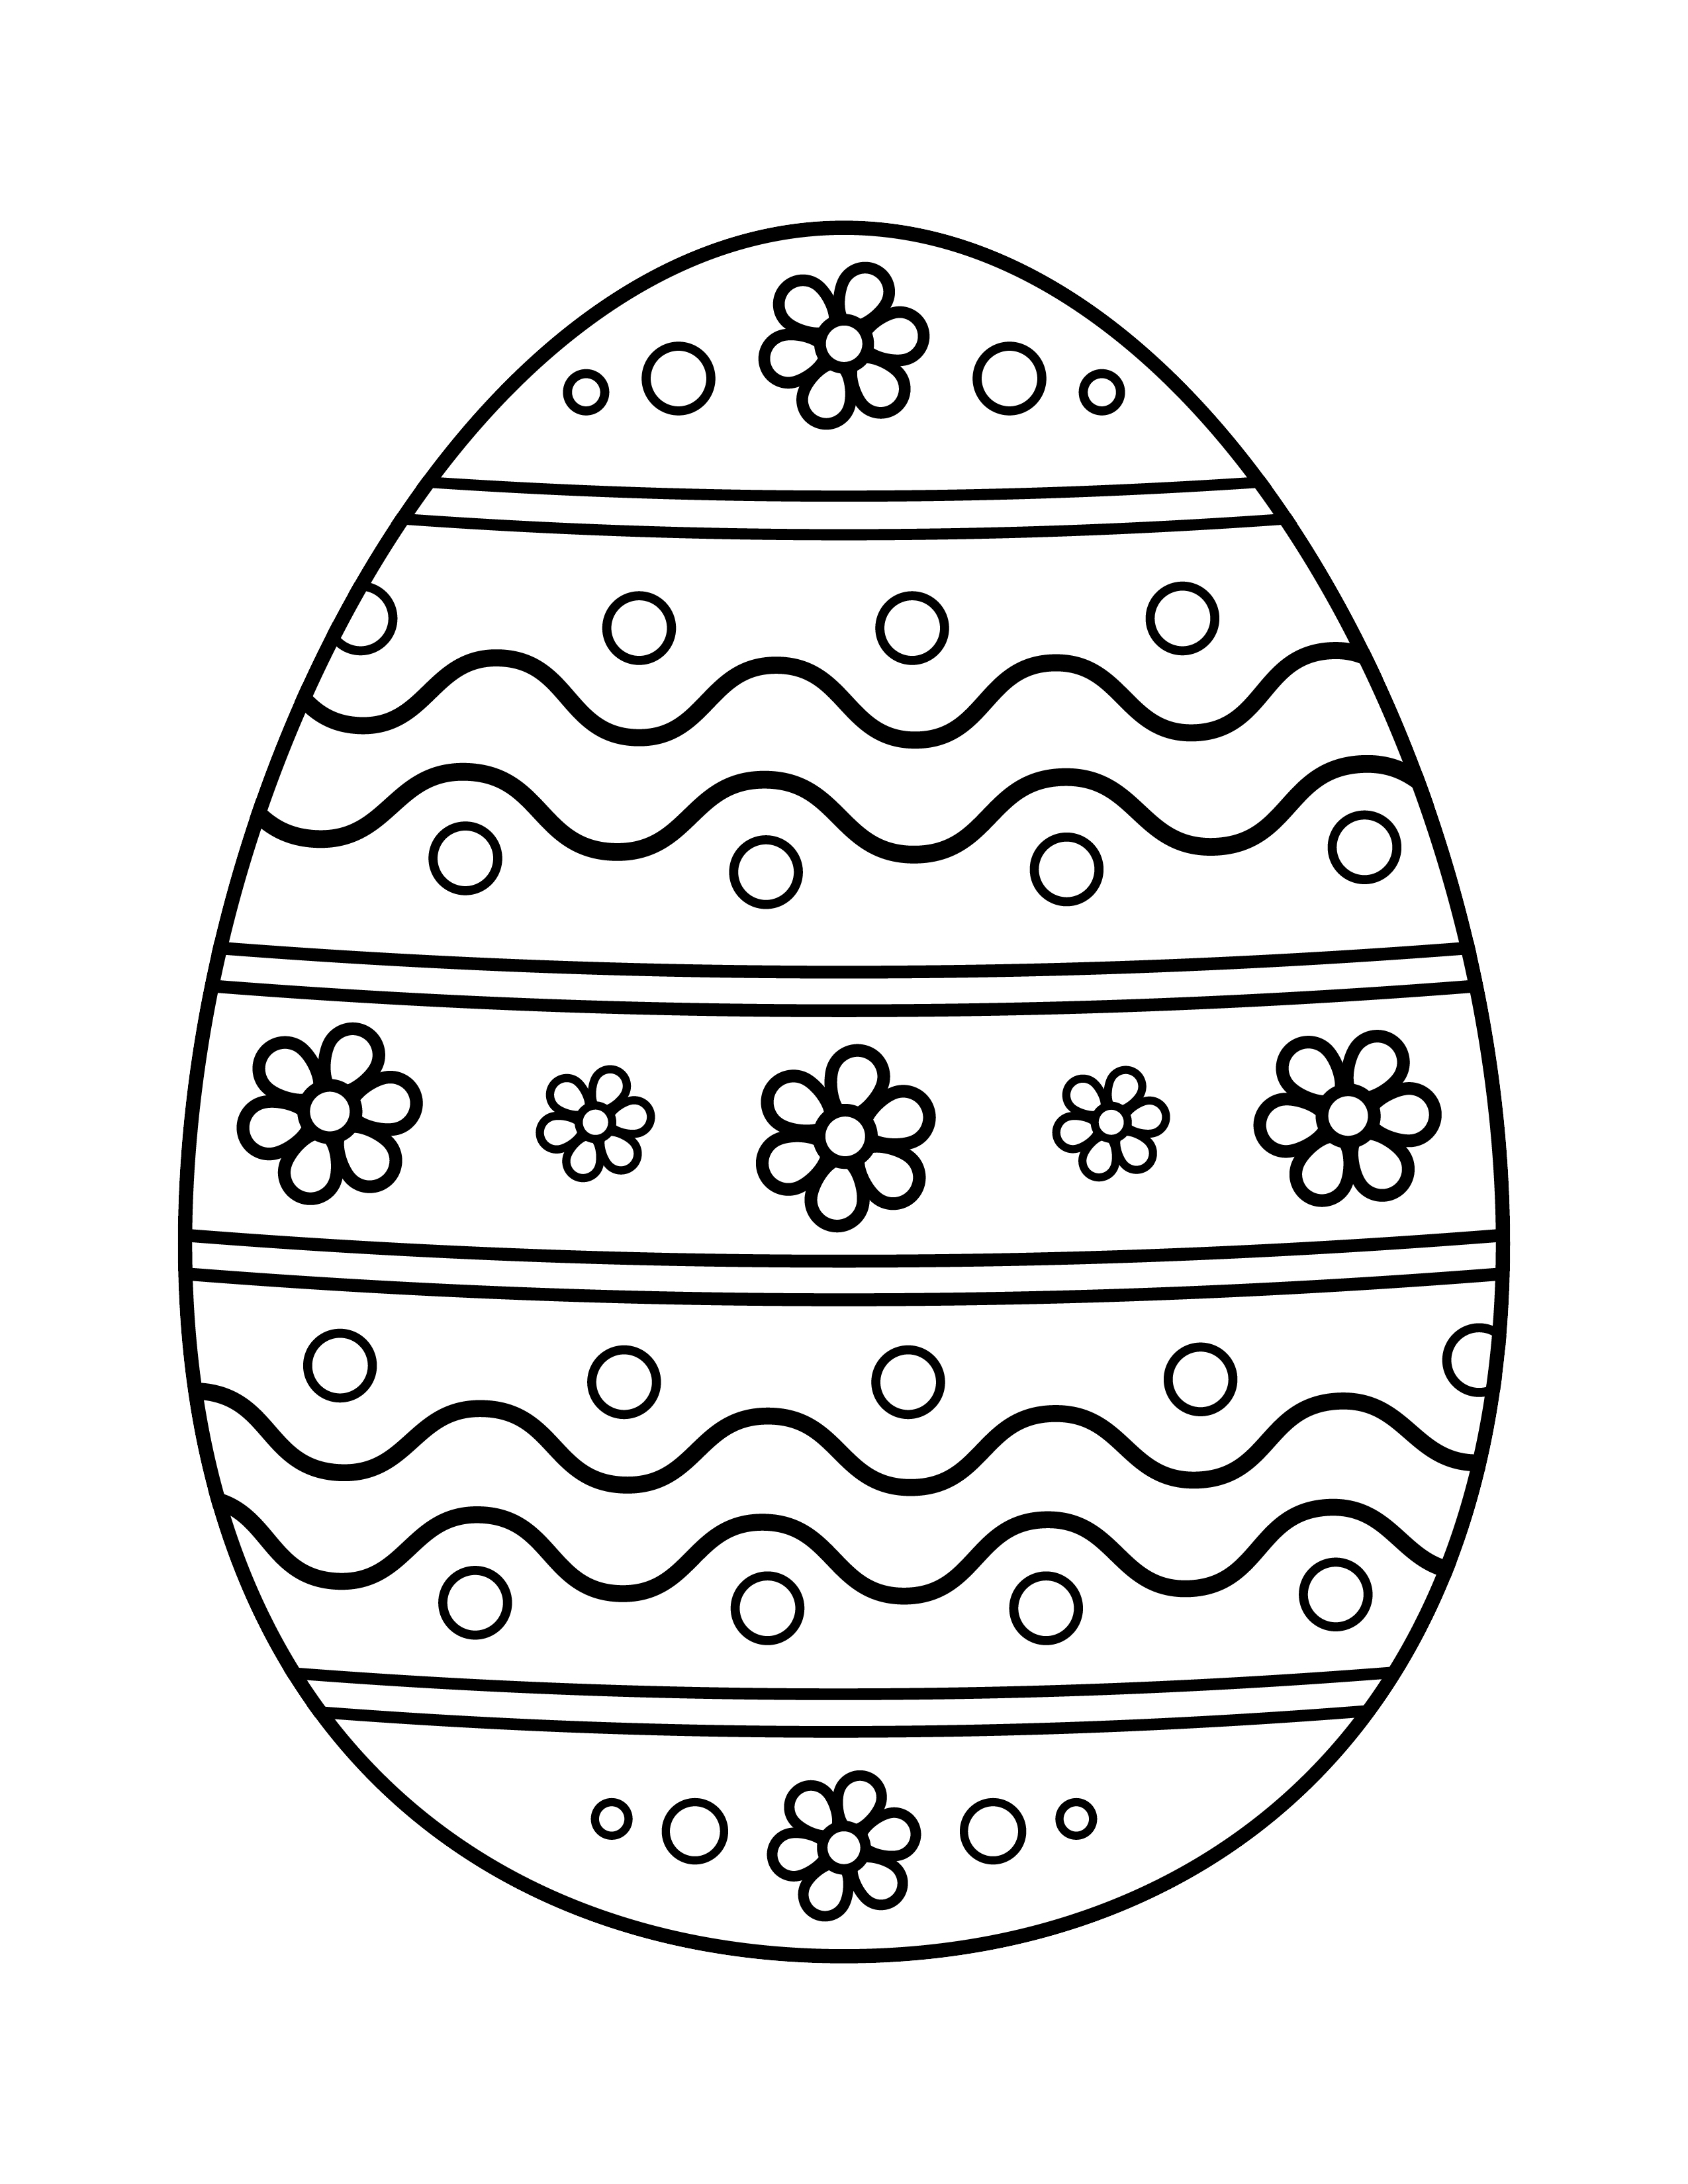 Easter Egg Coloring Fun - Show us your best egg! | Free Stuff |  williamsonhomepage.com